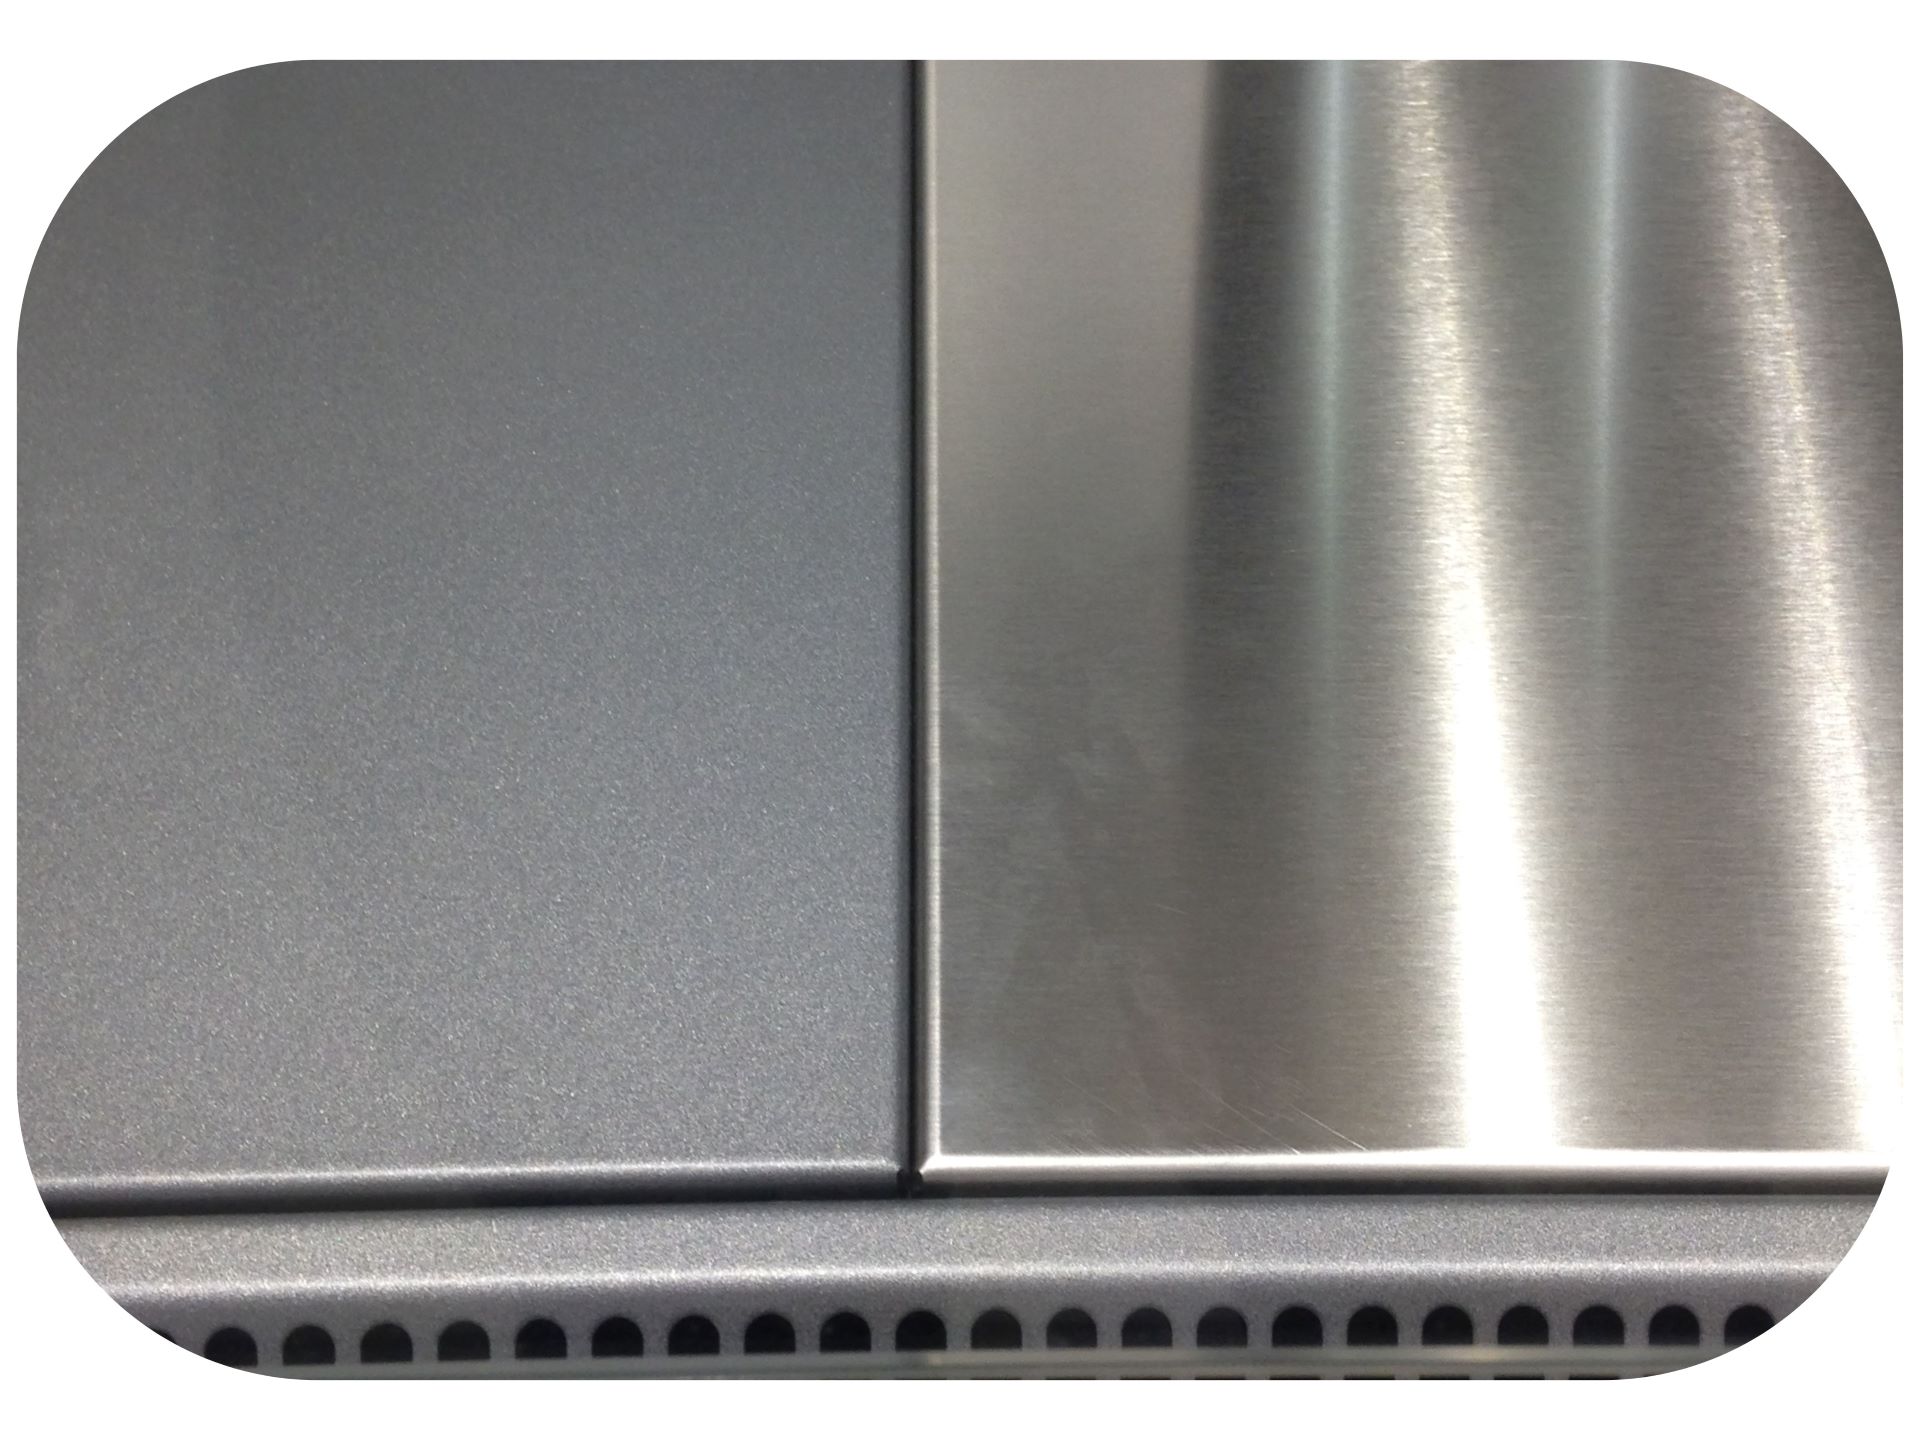 Worktop with teflon couting (left) and stainless steel (right)